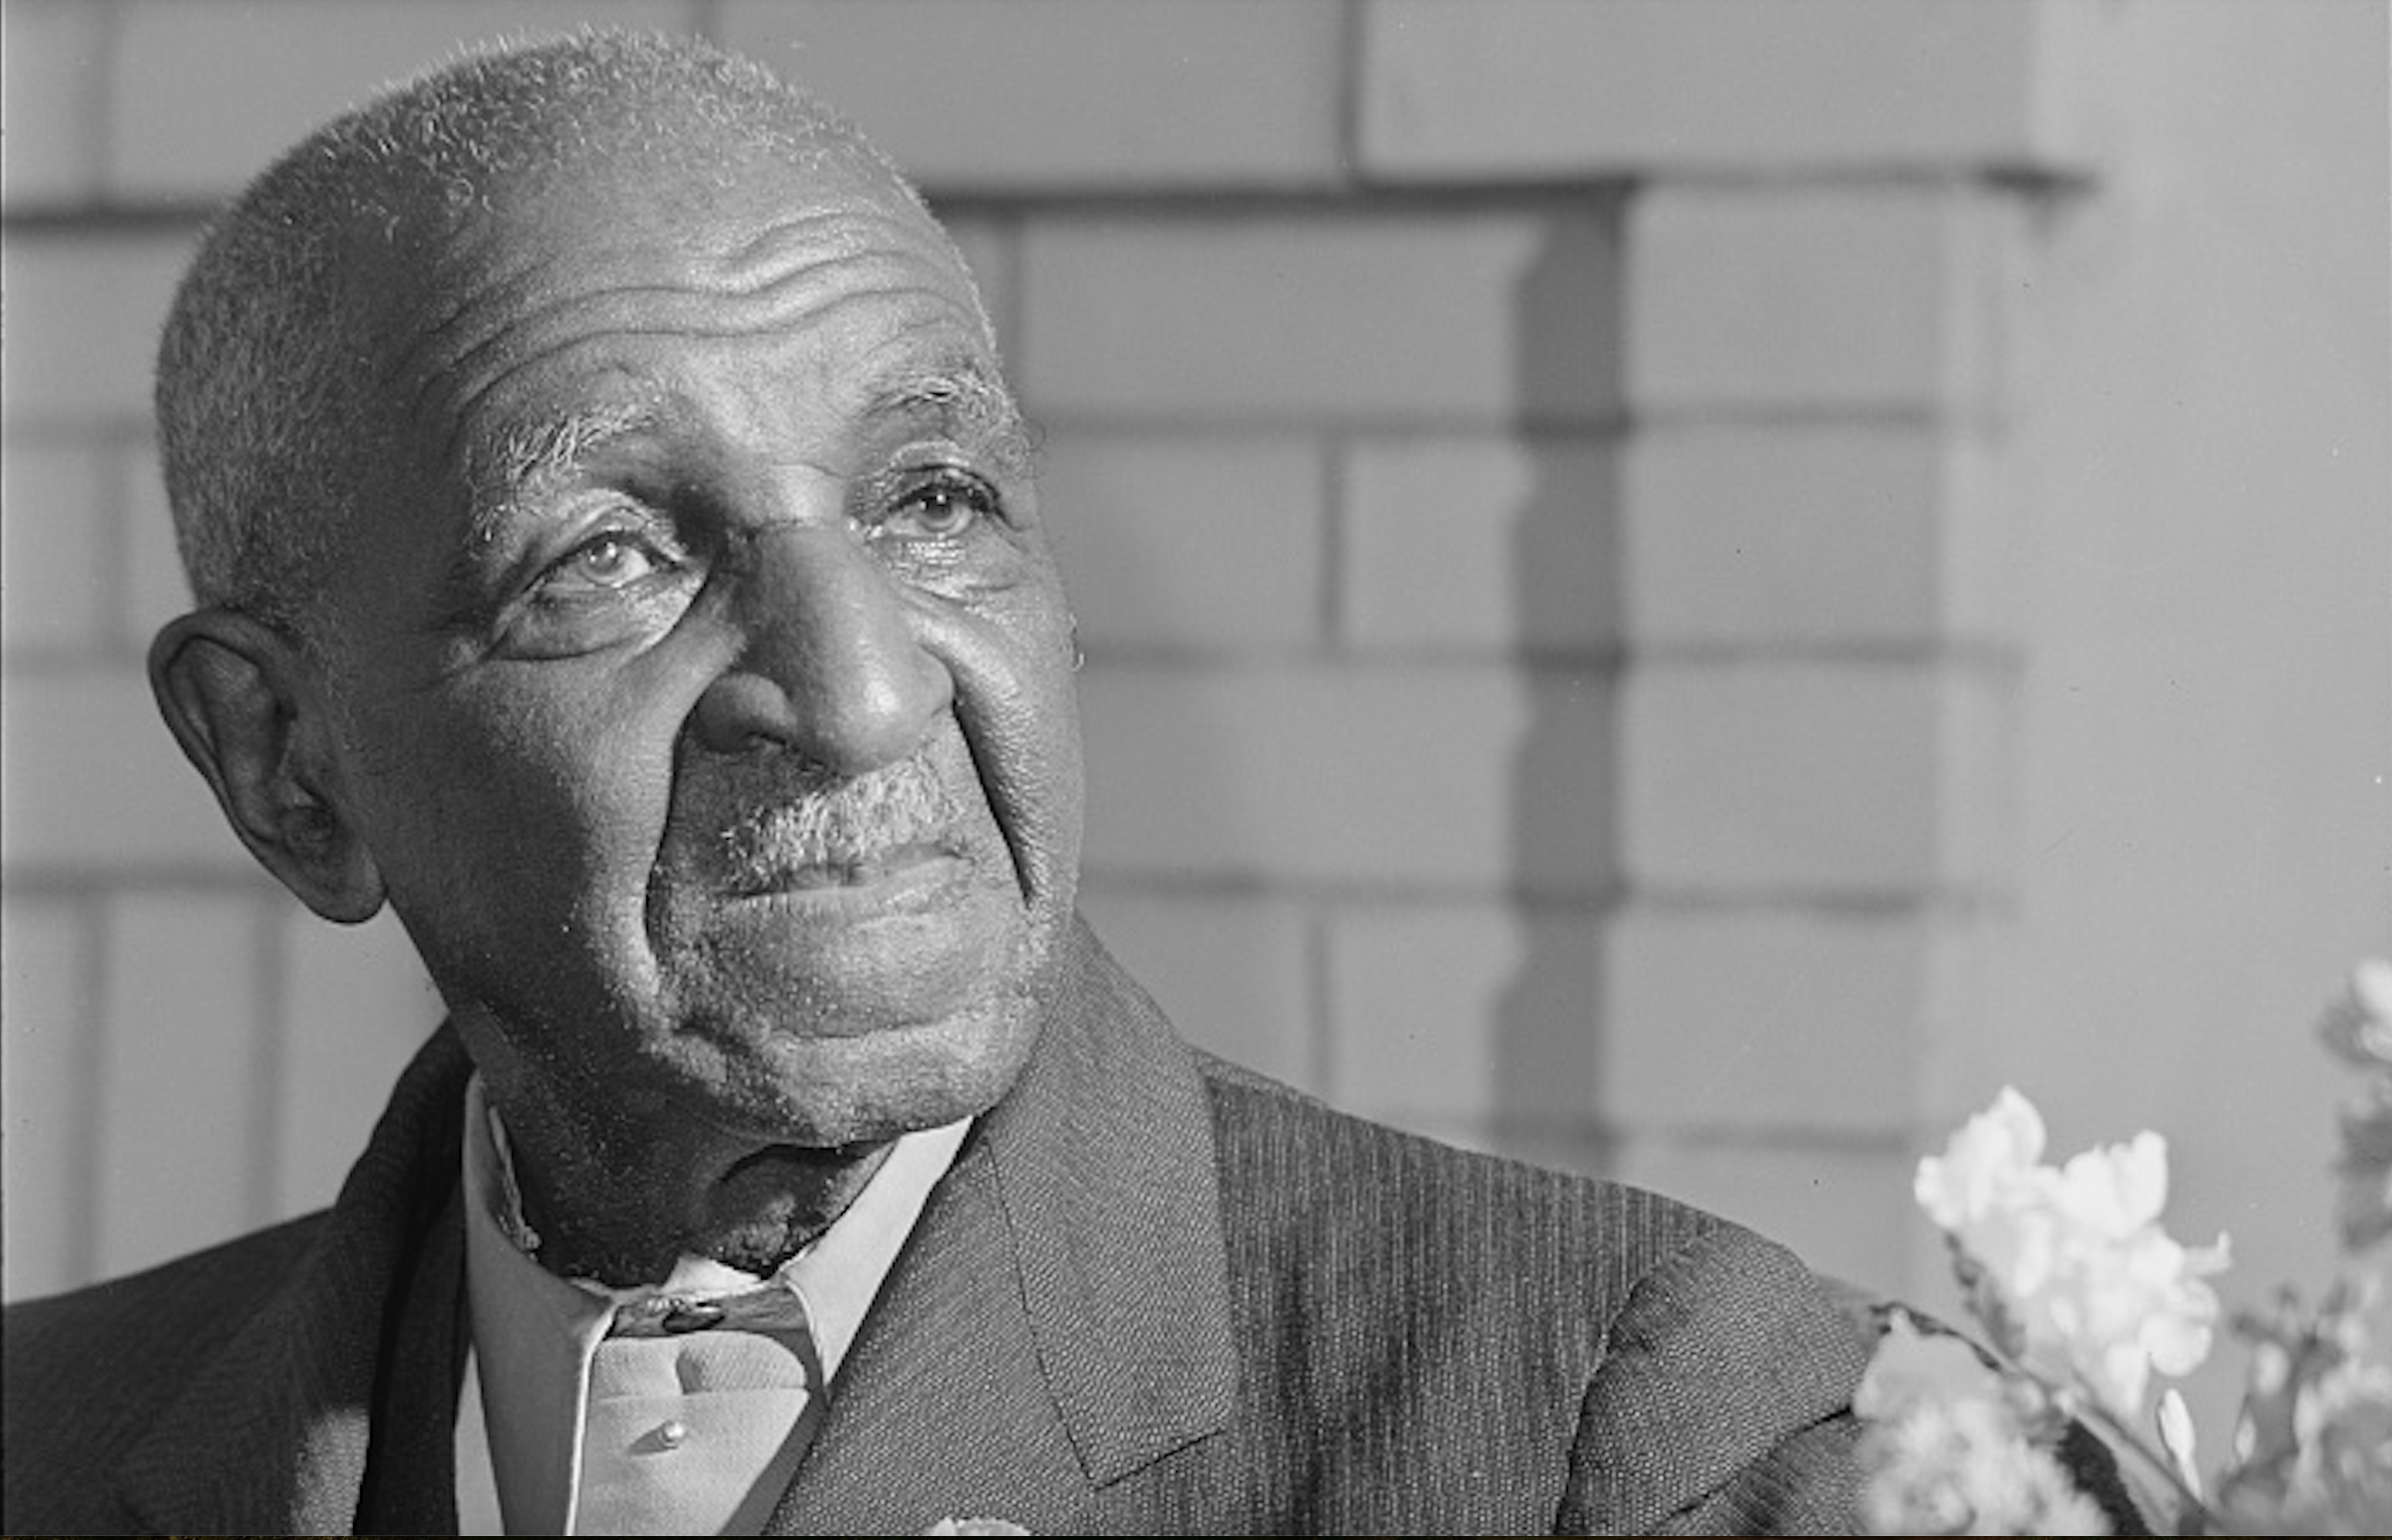 George Washington Carver and the Innovation of Agriculture [Biography]